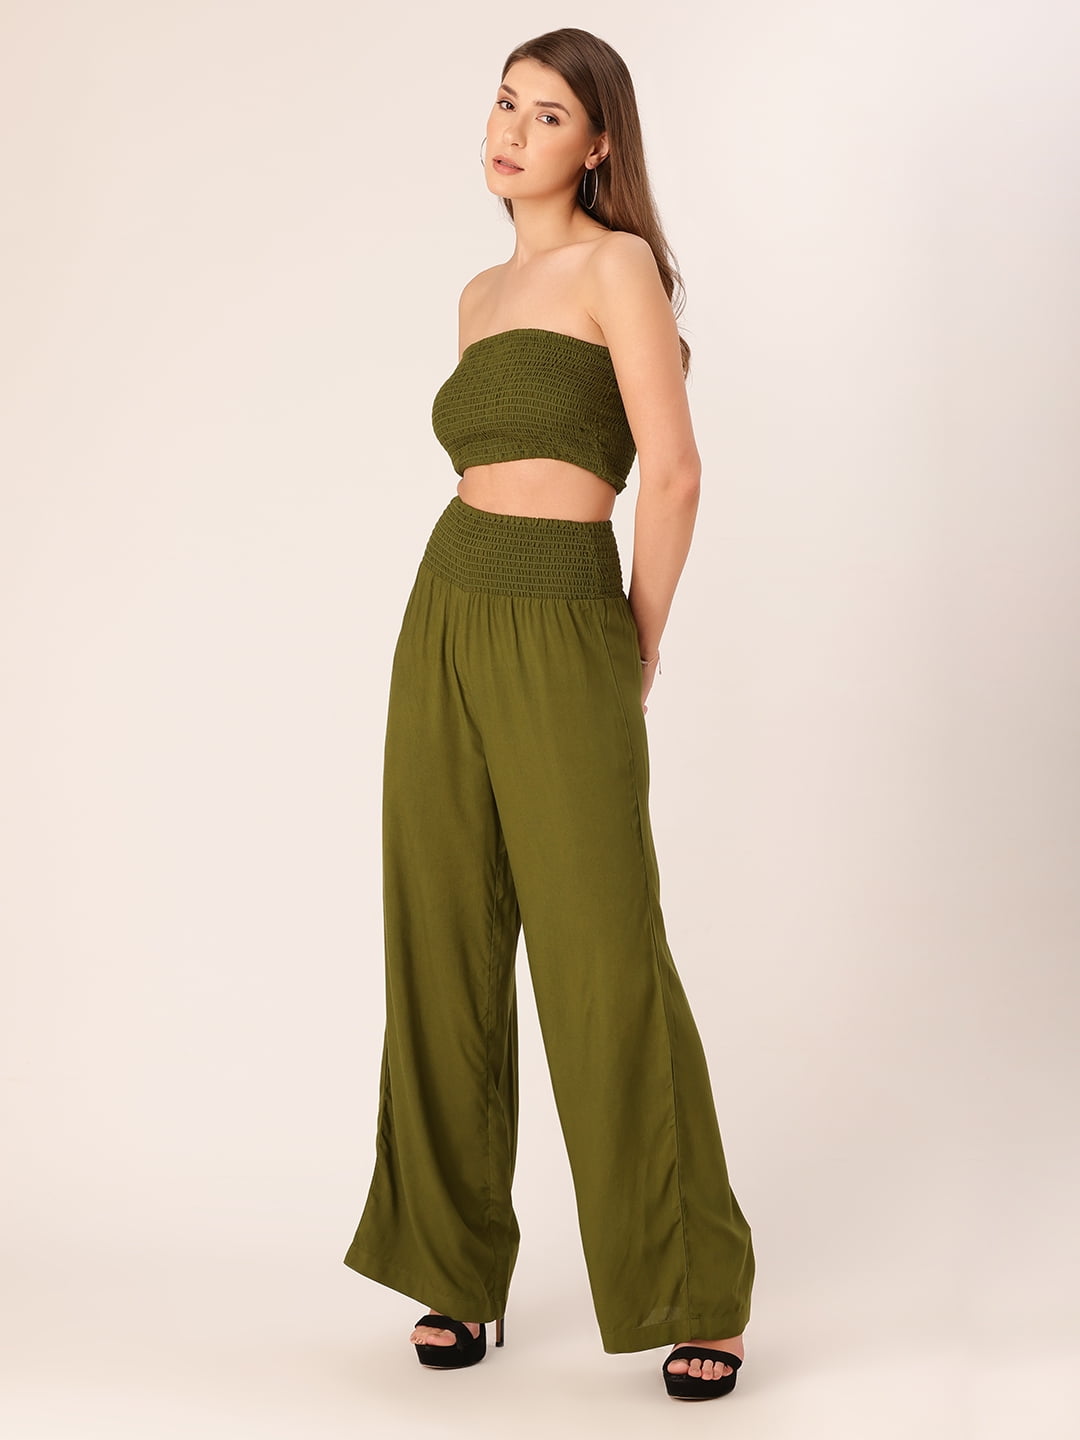 DressBerry Women's Solid Viscose Rayon Tube Top and Pants 2 PC Co-ord Set  Tube Top Long Palazzo Pants Elastic Waist Casual Summer Wear Light  Weighted Top Bottom Party Wear Set 